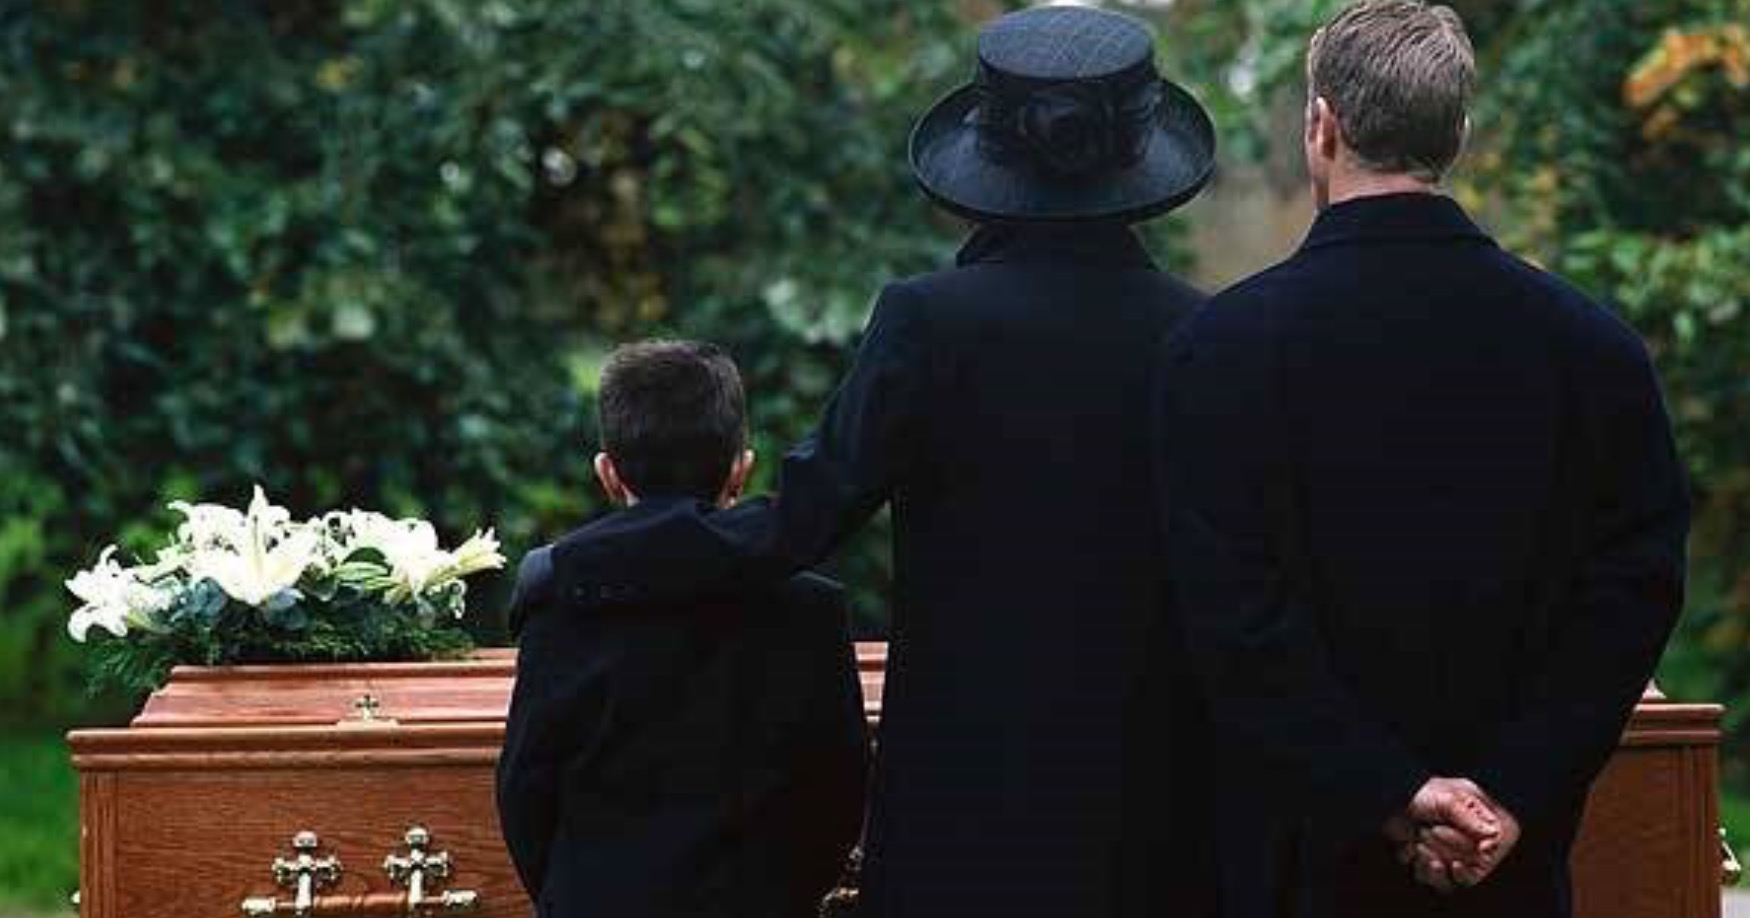 FUNERAL TRADITIONS: Why Do People Wear Black?